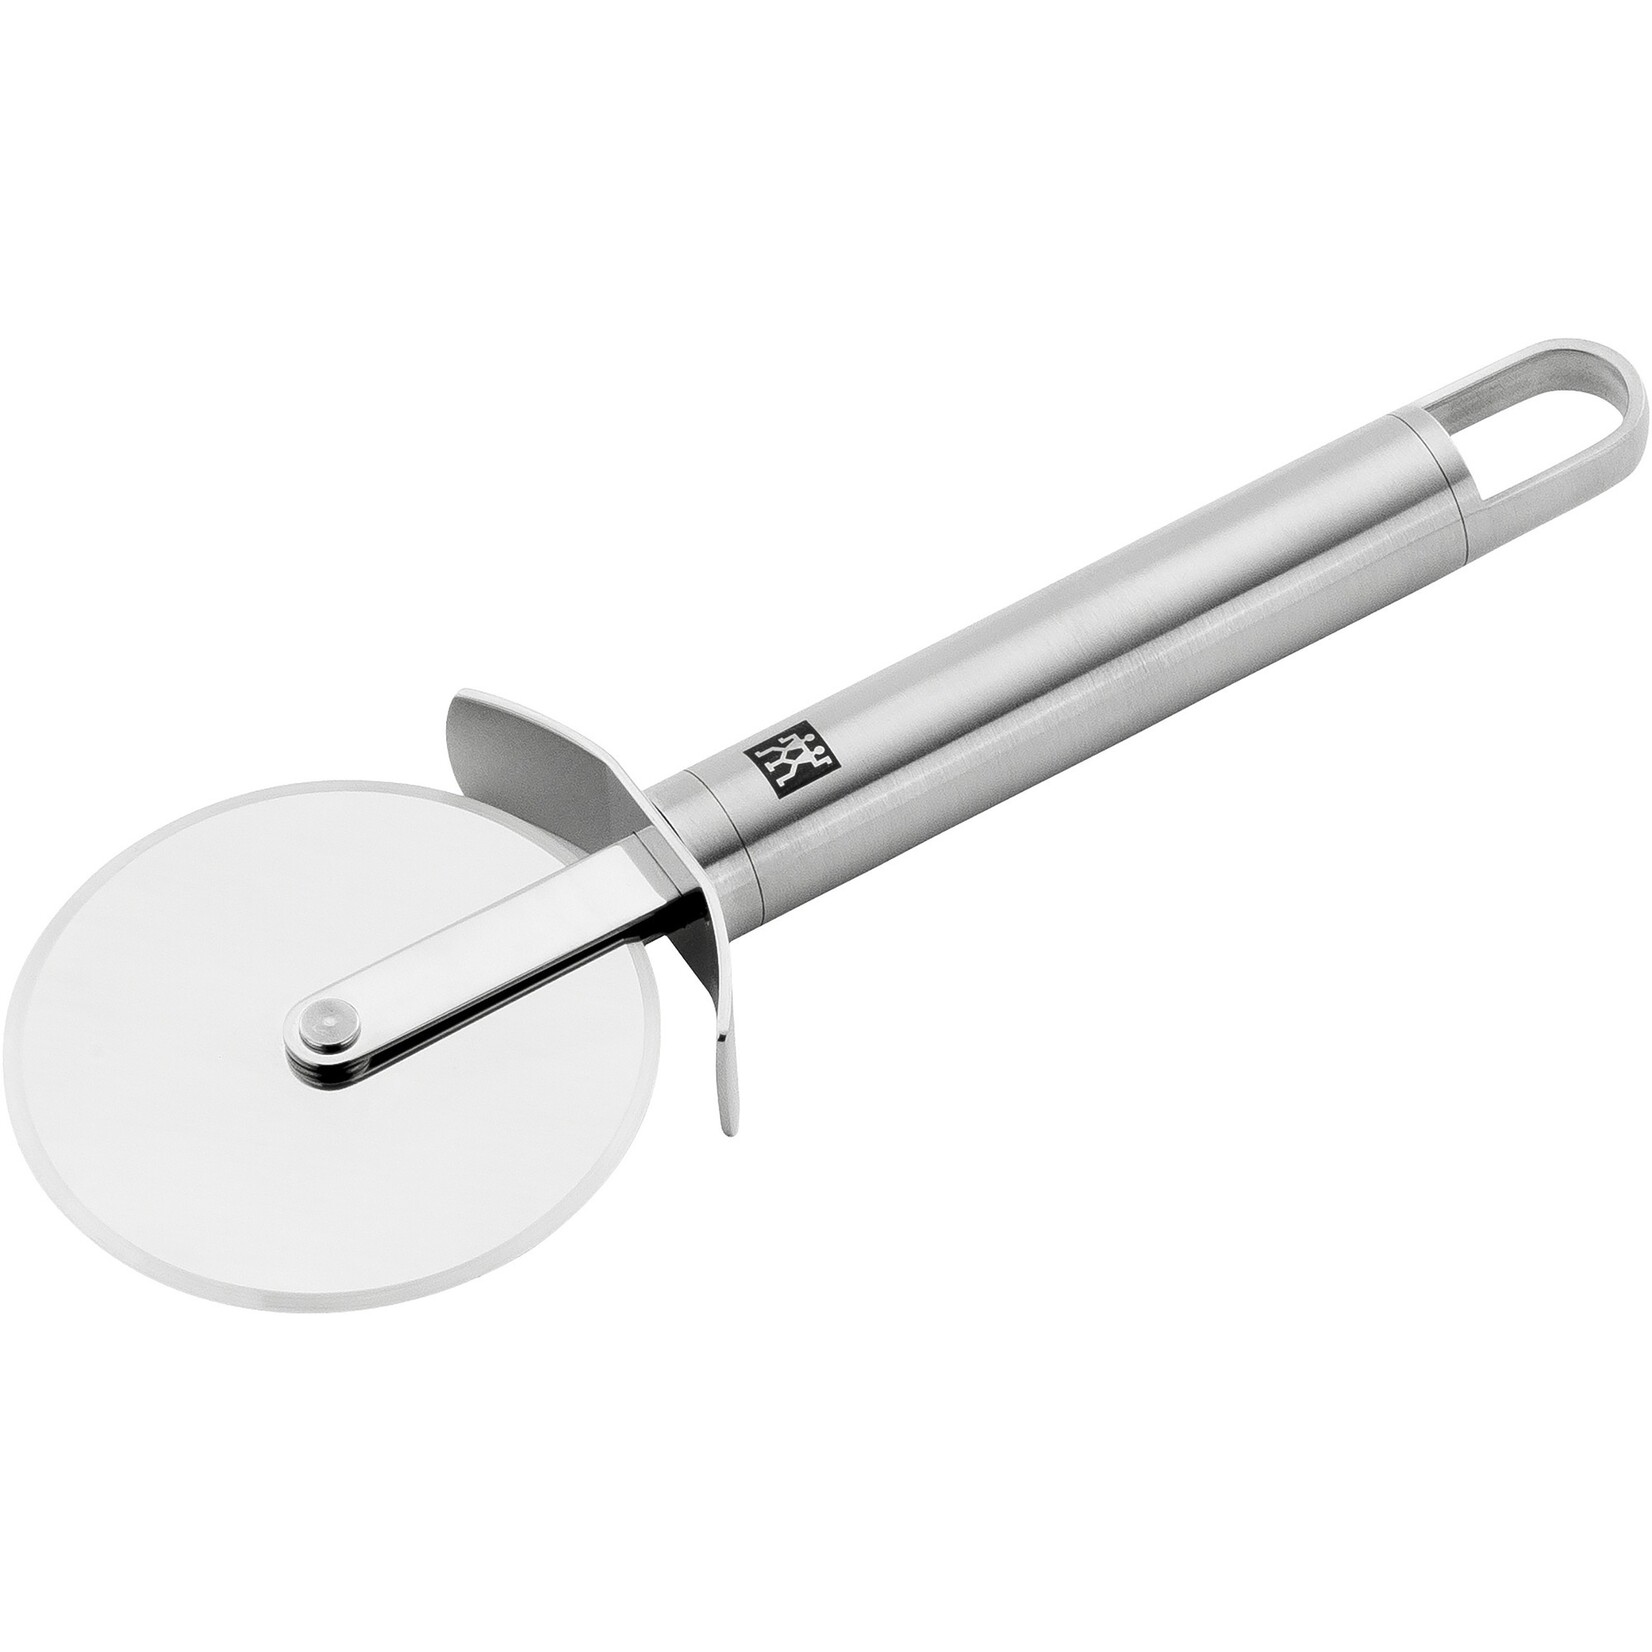 Zwilling Zwilling Pro pizzasnijder